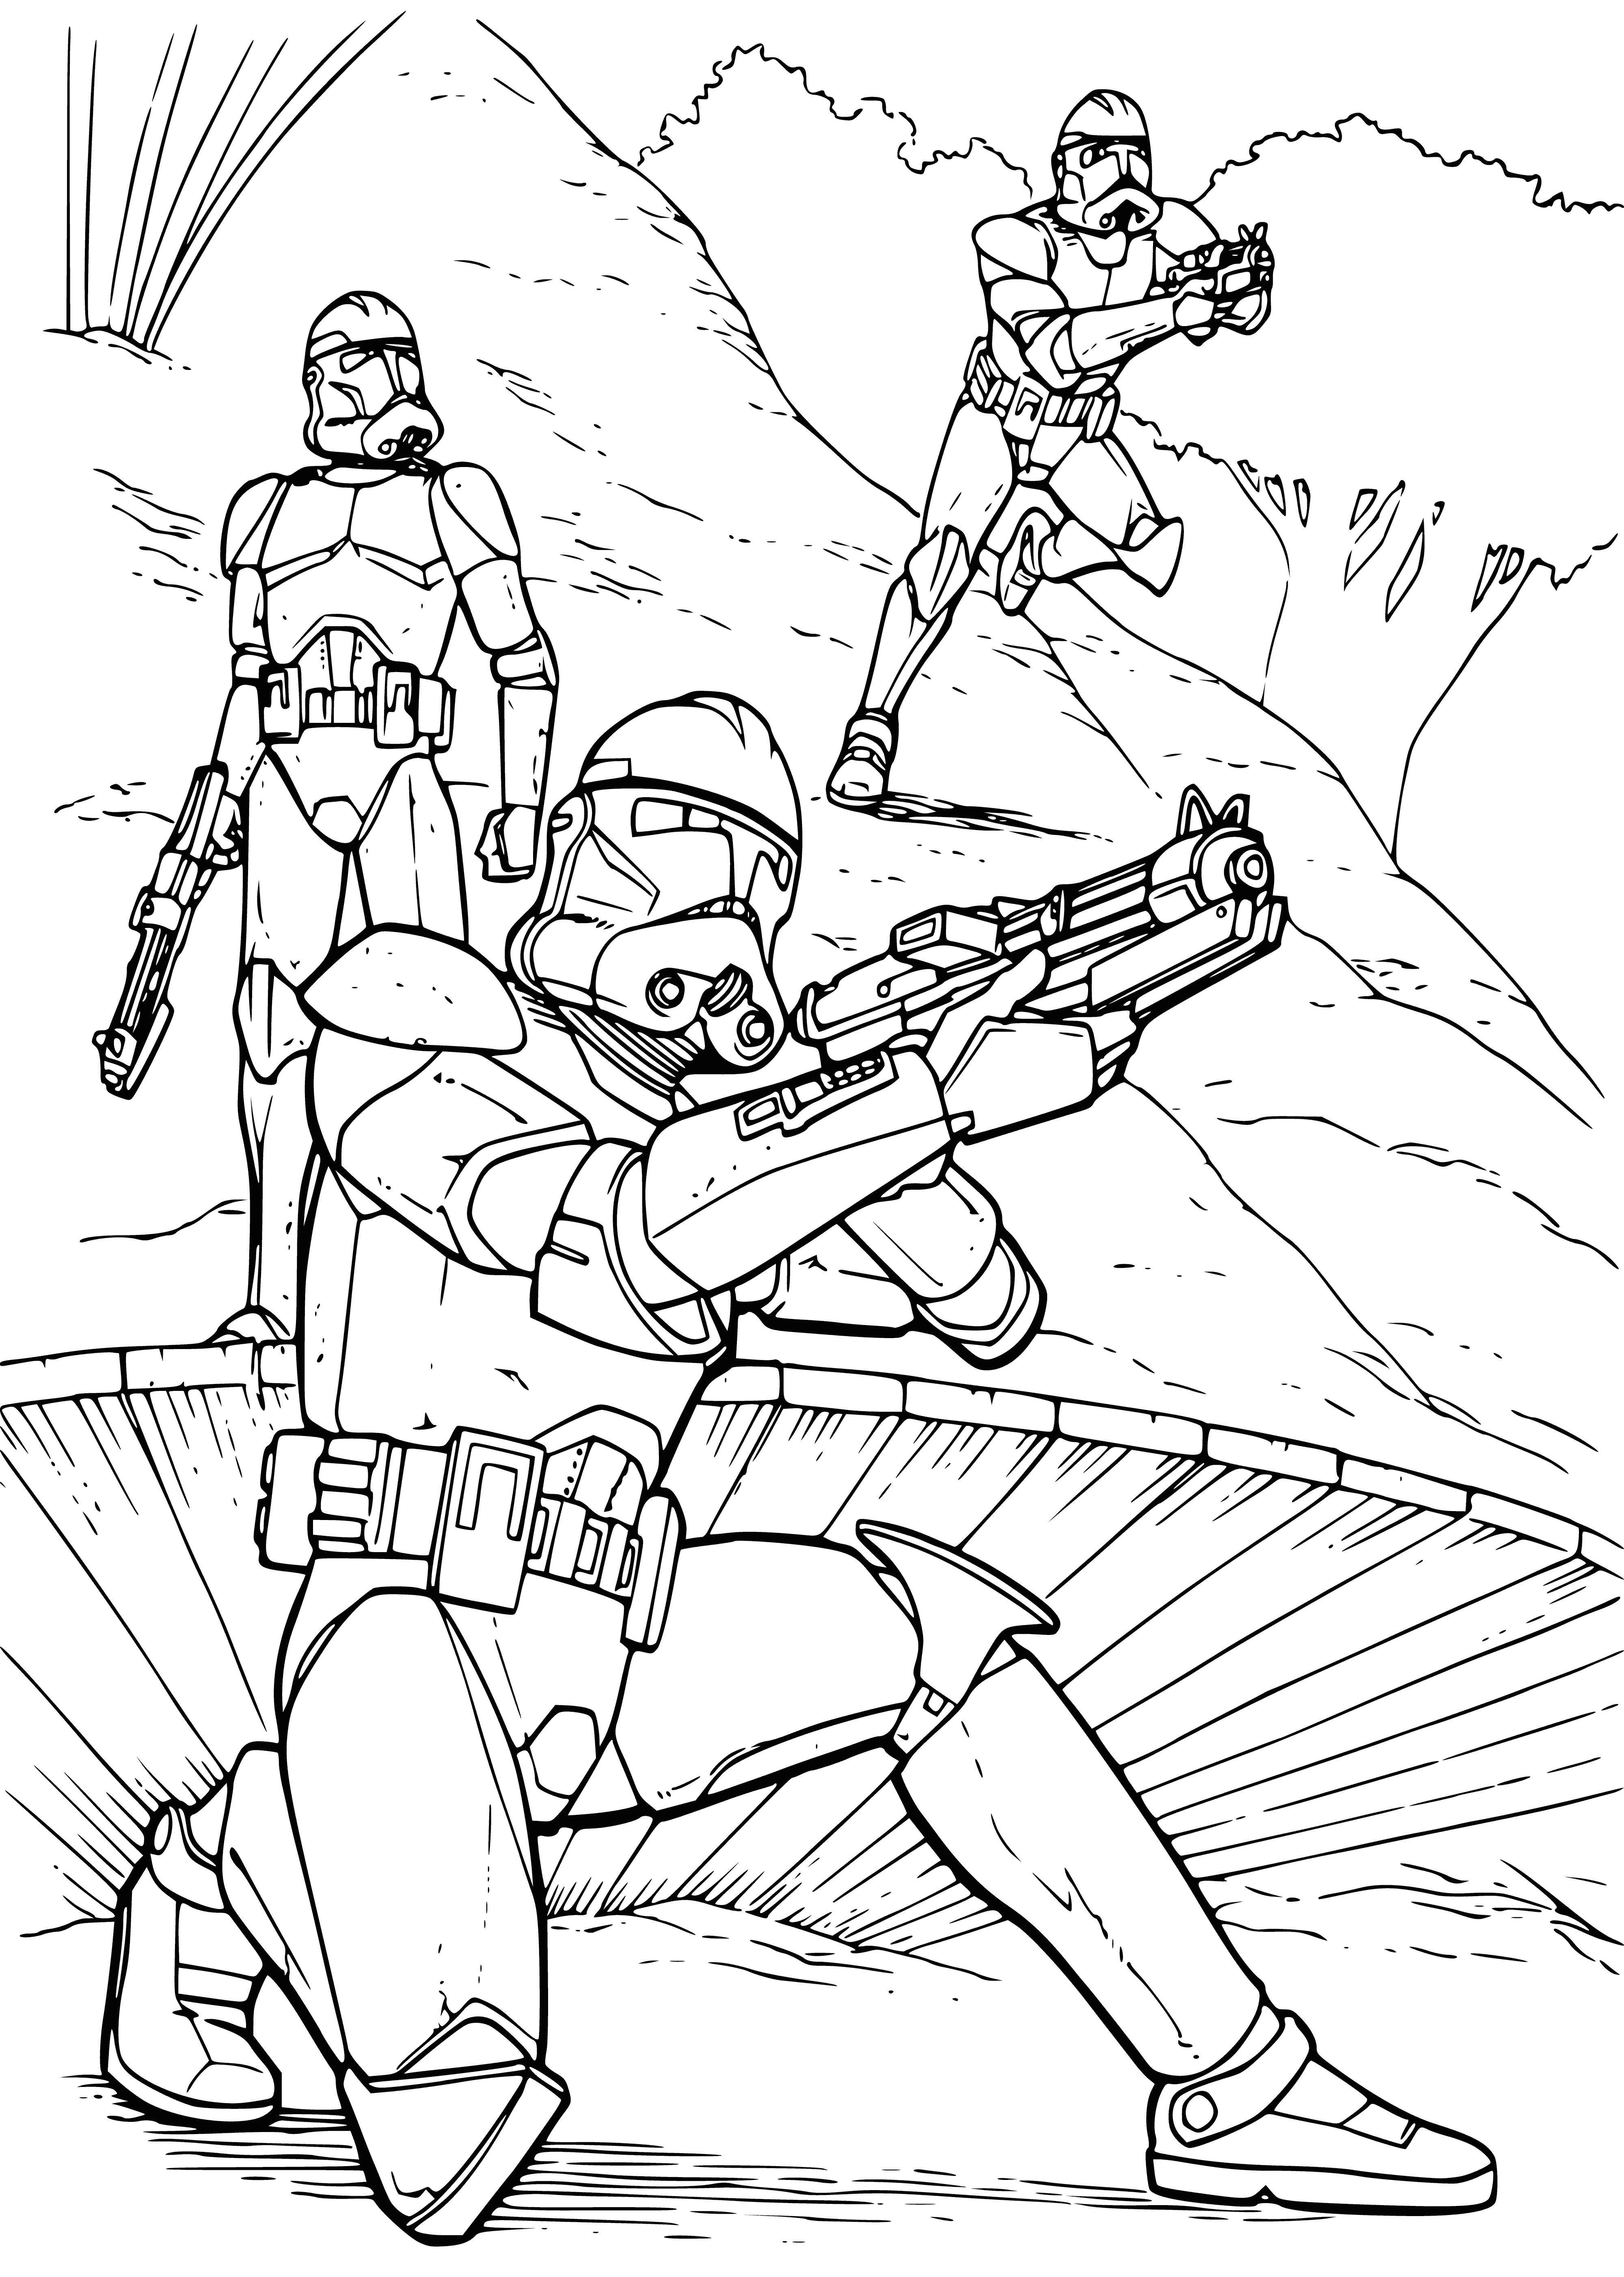 Stormtroopers coloring page